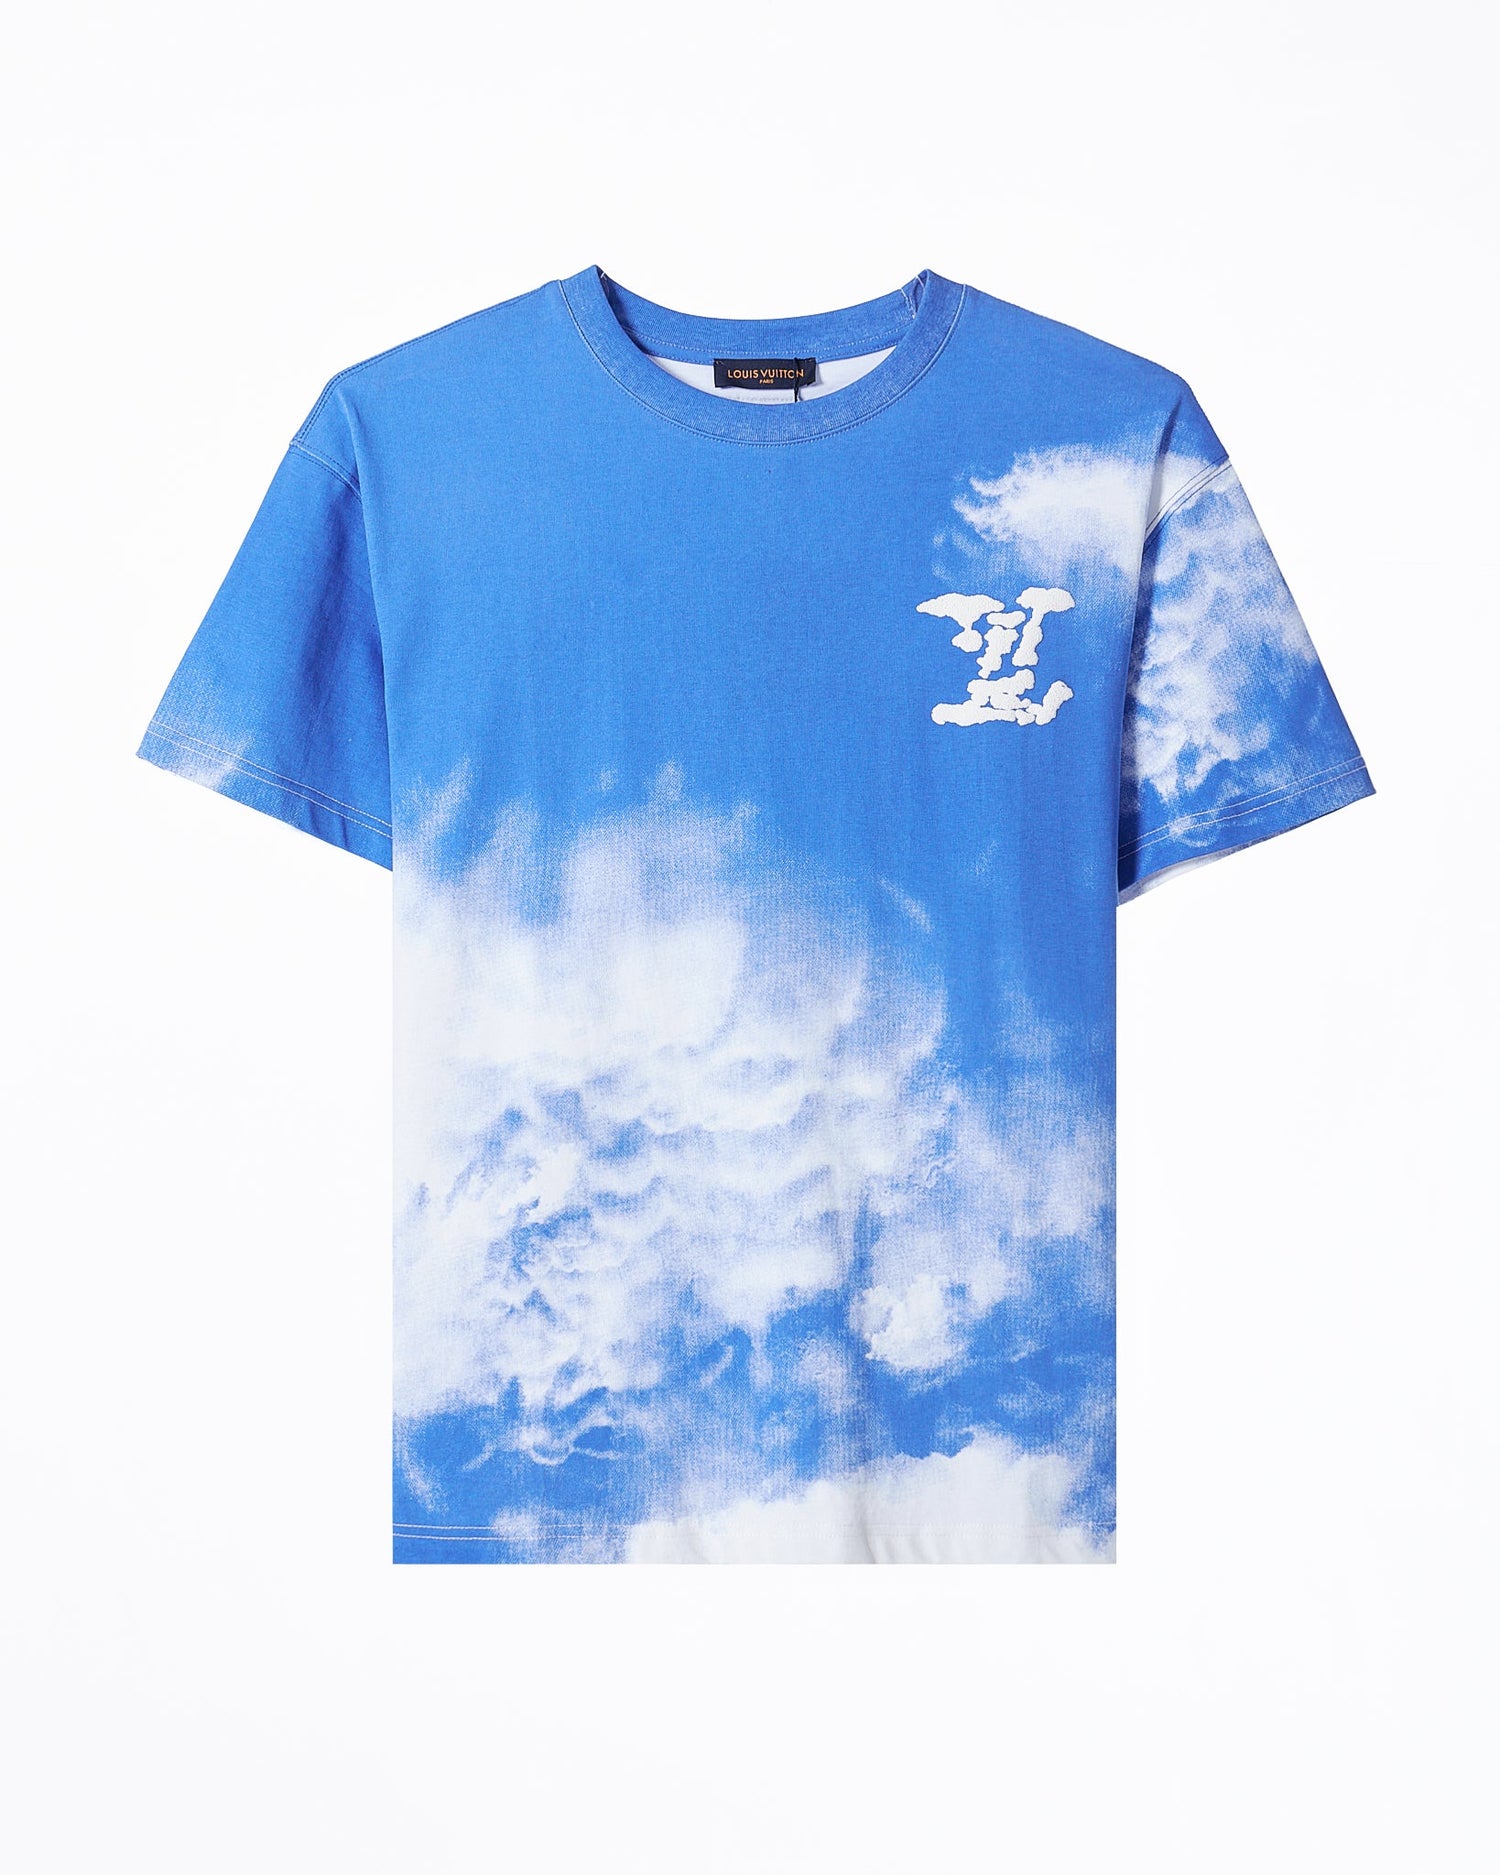 MOI OUTFIT-LV Cloudy Printed Men T-Shirt 52.90